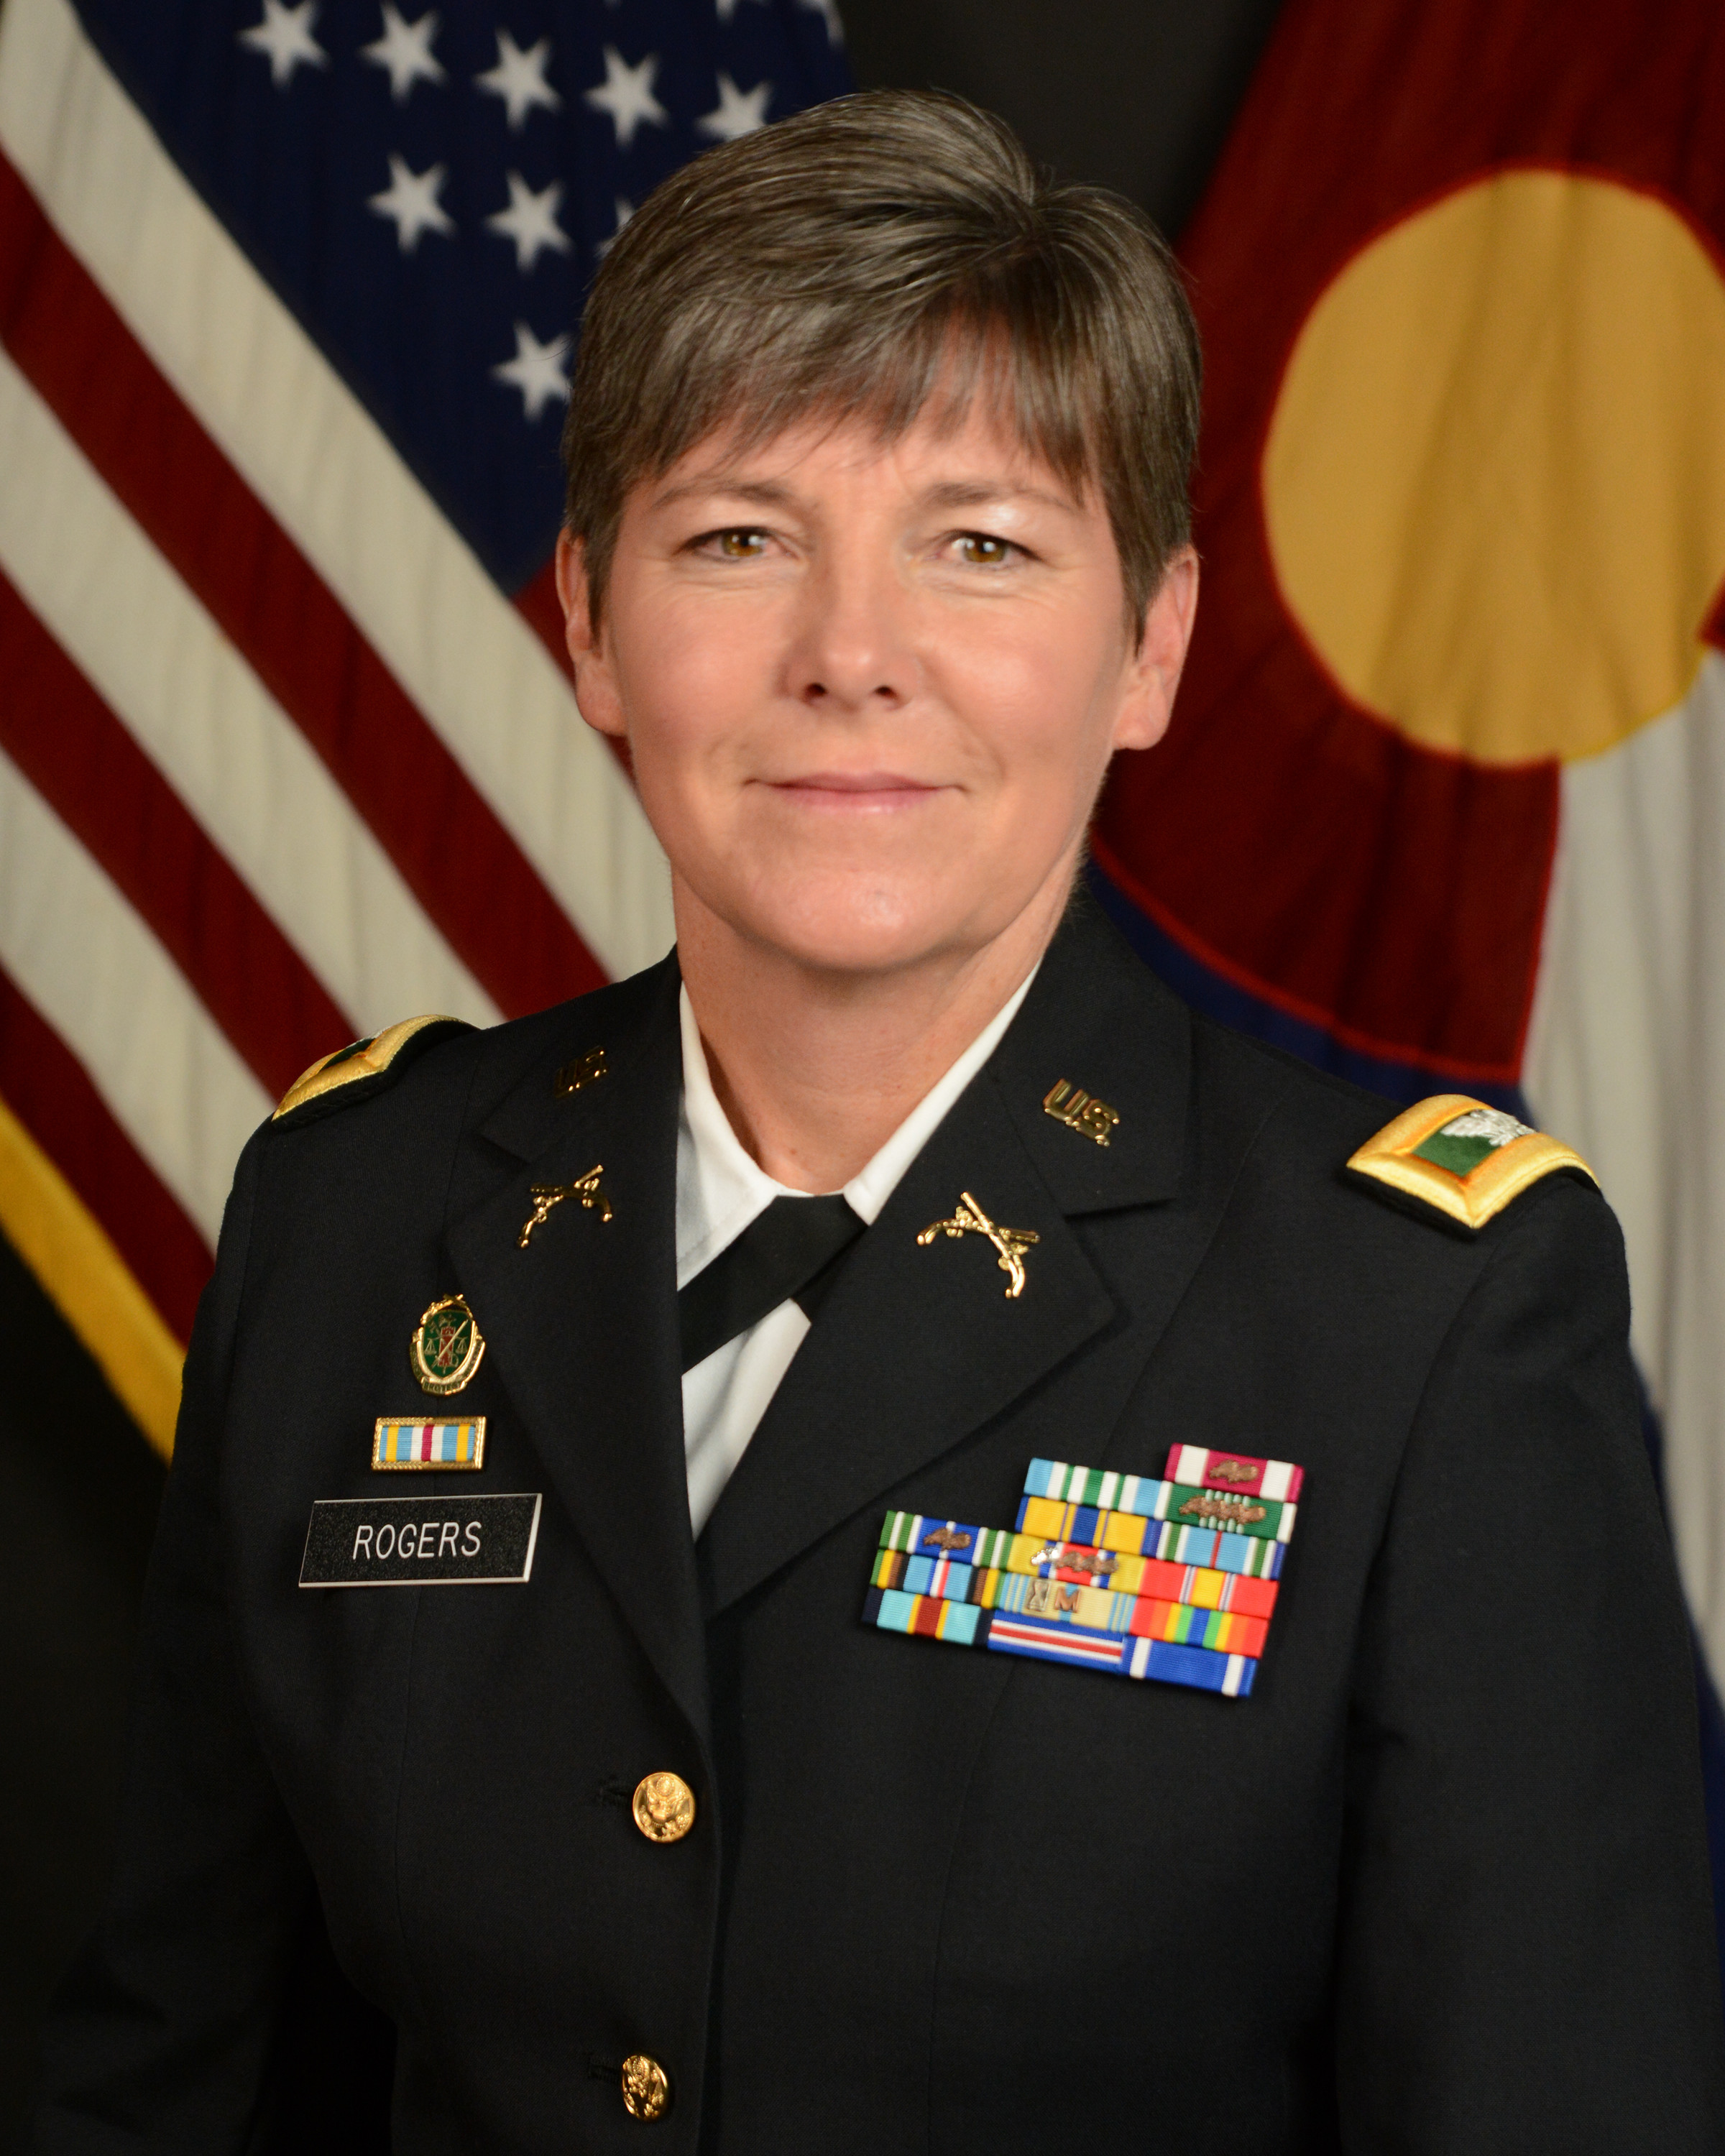 Colorado Army National Guard Welcomes New Commanding General At Change